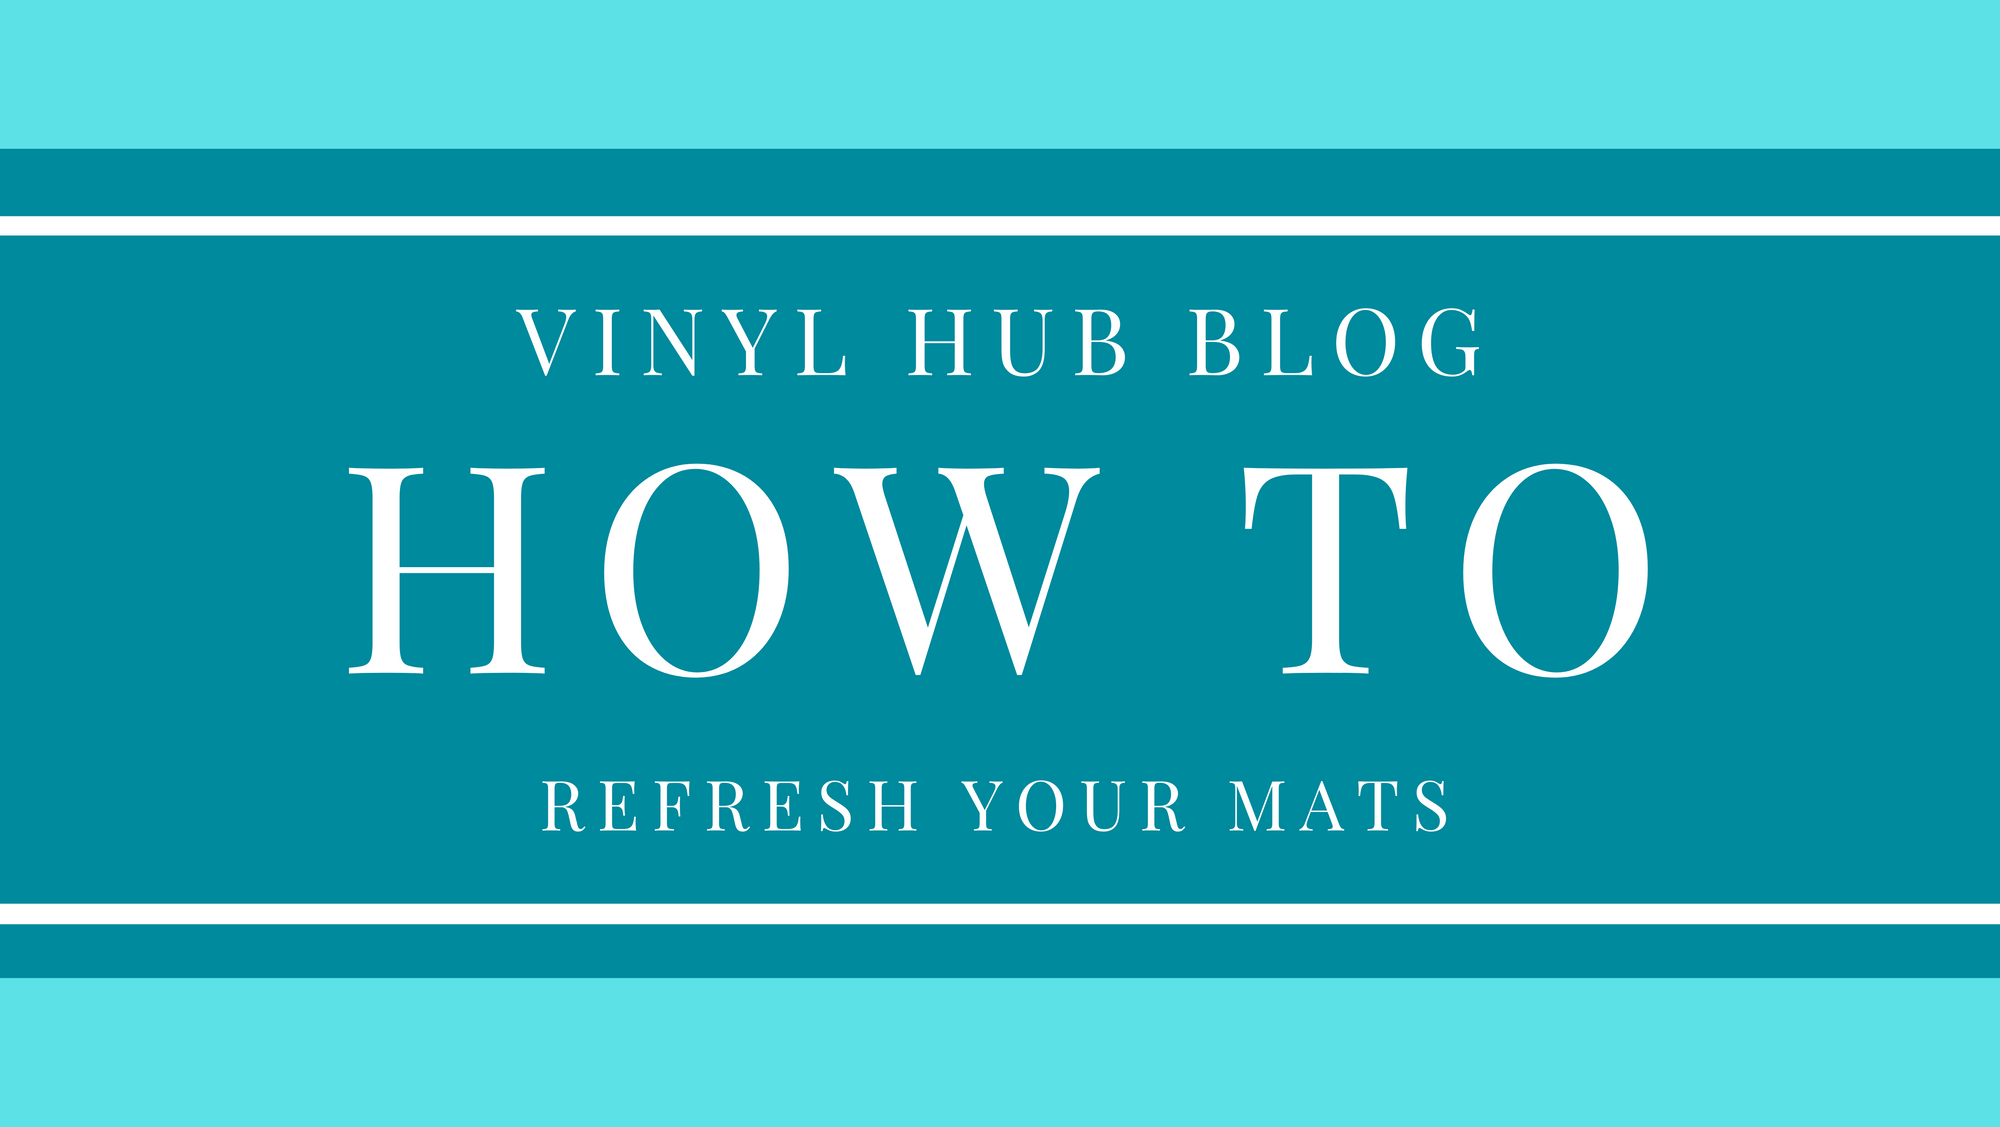 How To : Refresh Your Mats